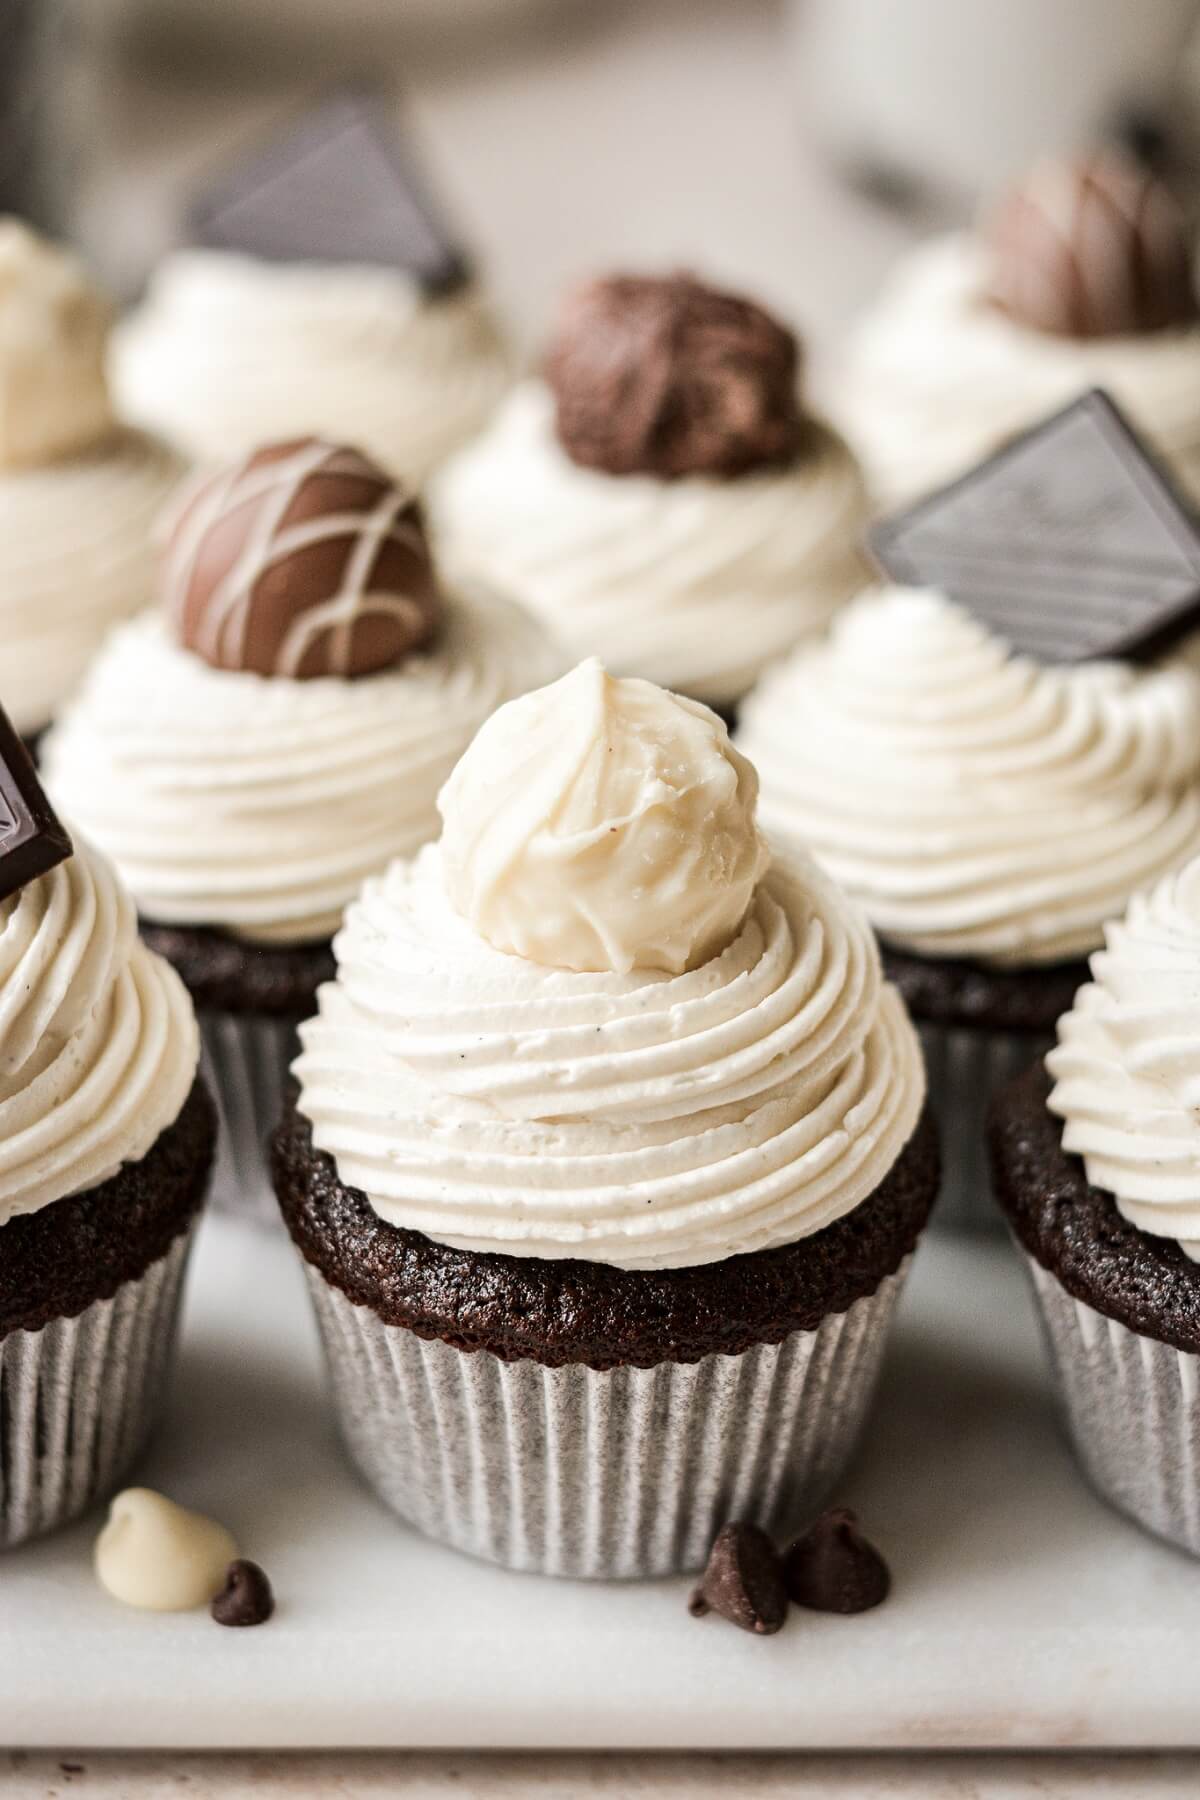 Chocolate truffles on top of black and white chocolate cupcakes.